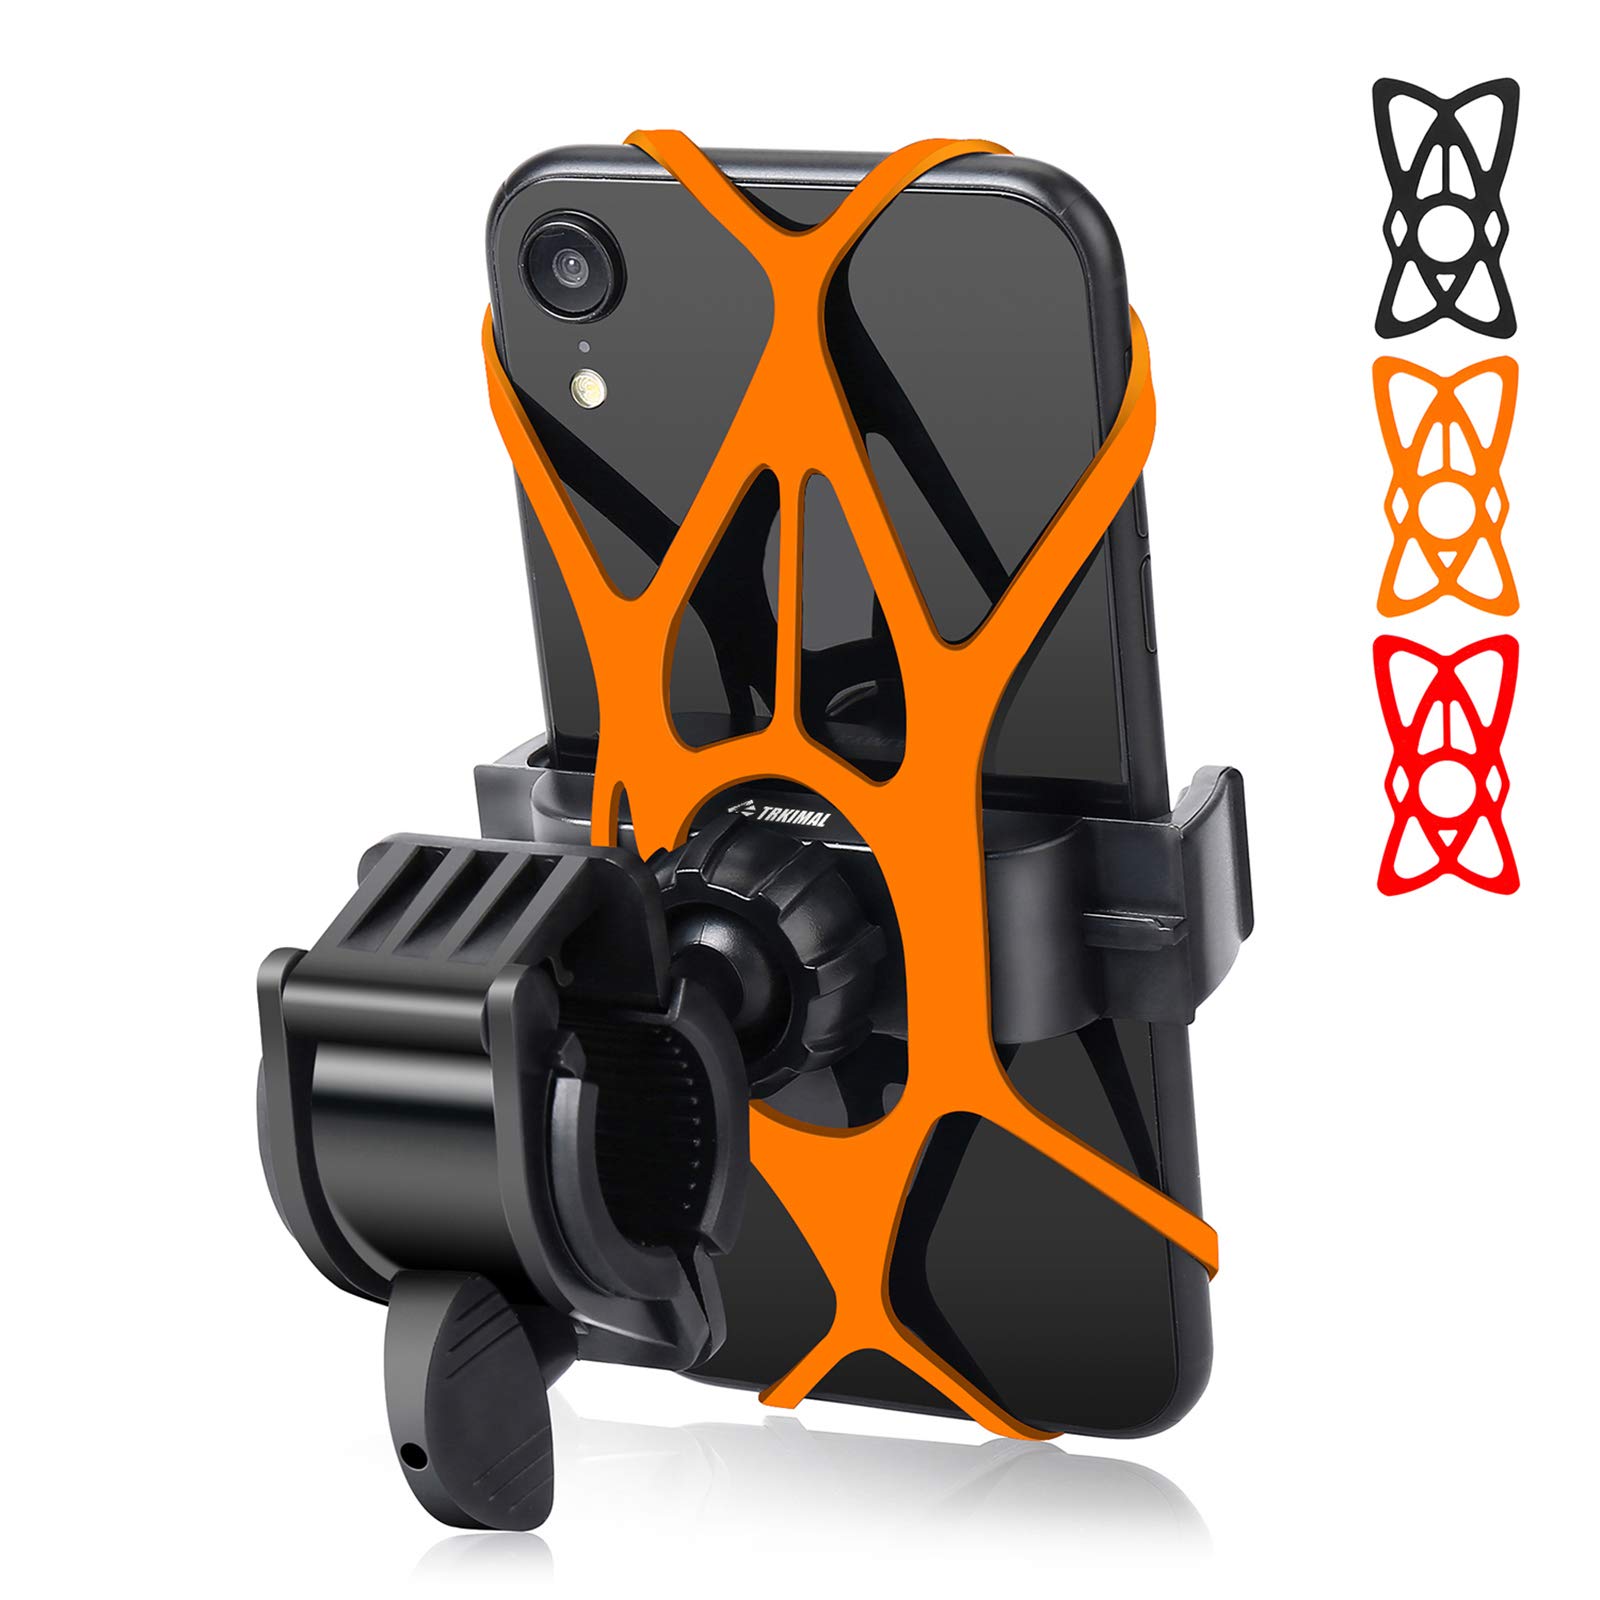 TRKIMAL Bike Phone Mount Universal Adjustable Cell Phone Holder for Bicycle Motorcycle Compatible with iPhone Max Xr Xs X Pro 12 11 8 7 Plus, Galaxy S20 S10 S9 S8 S7 Edge Note 10 9 8 7